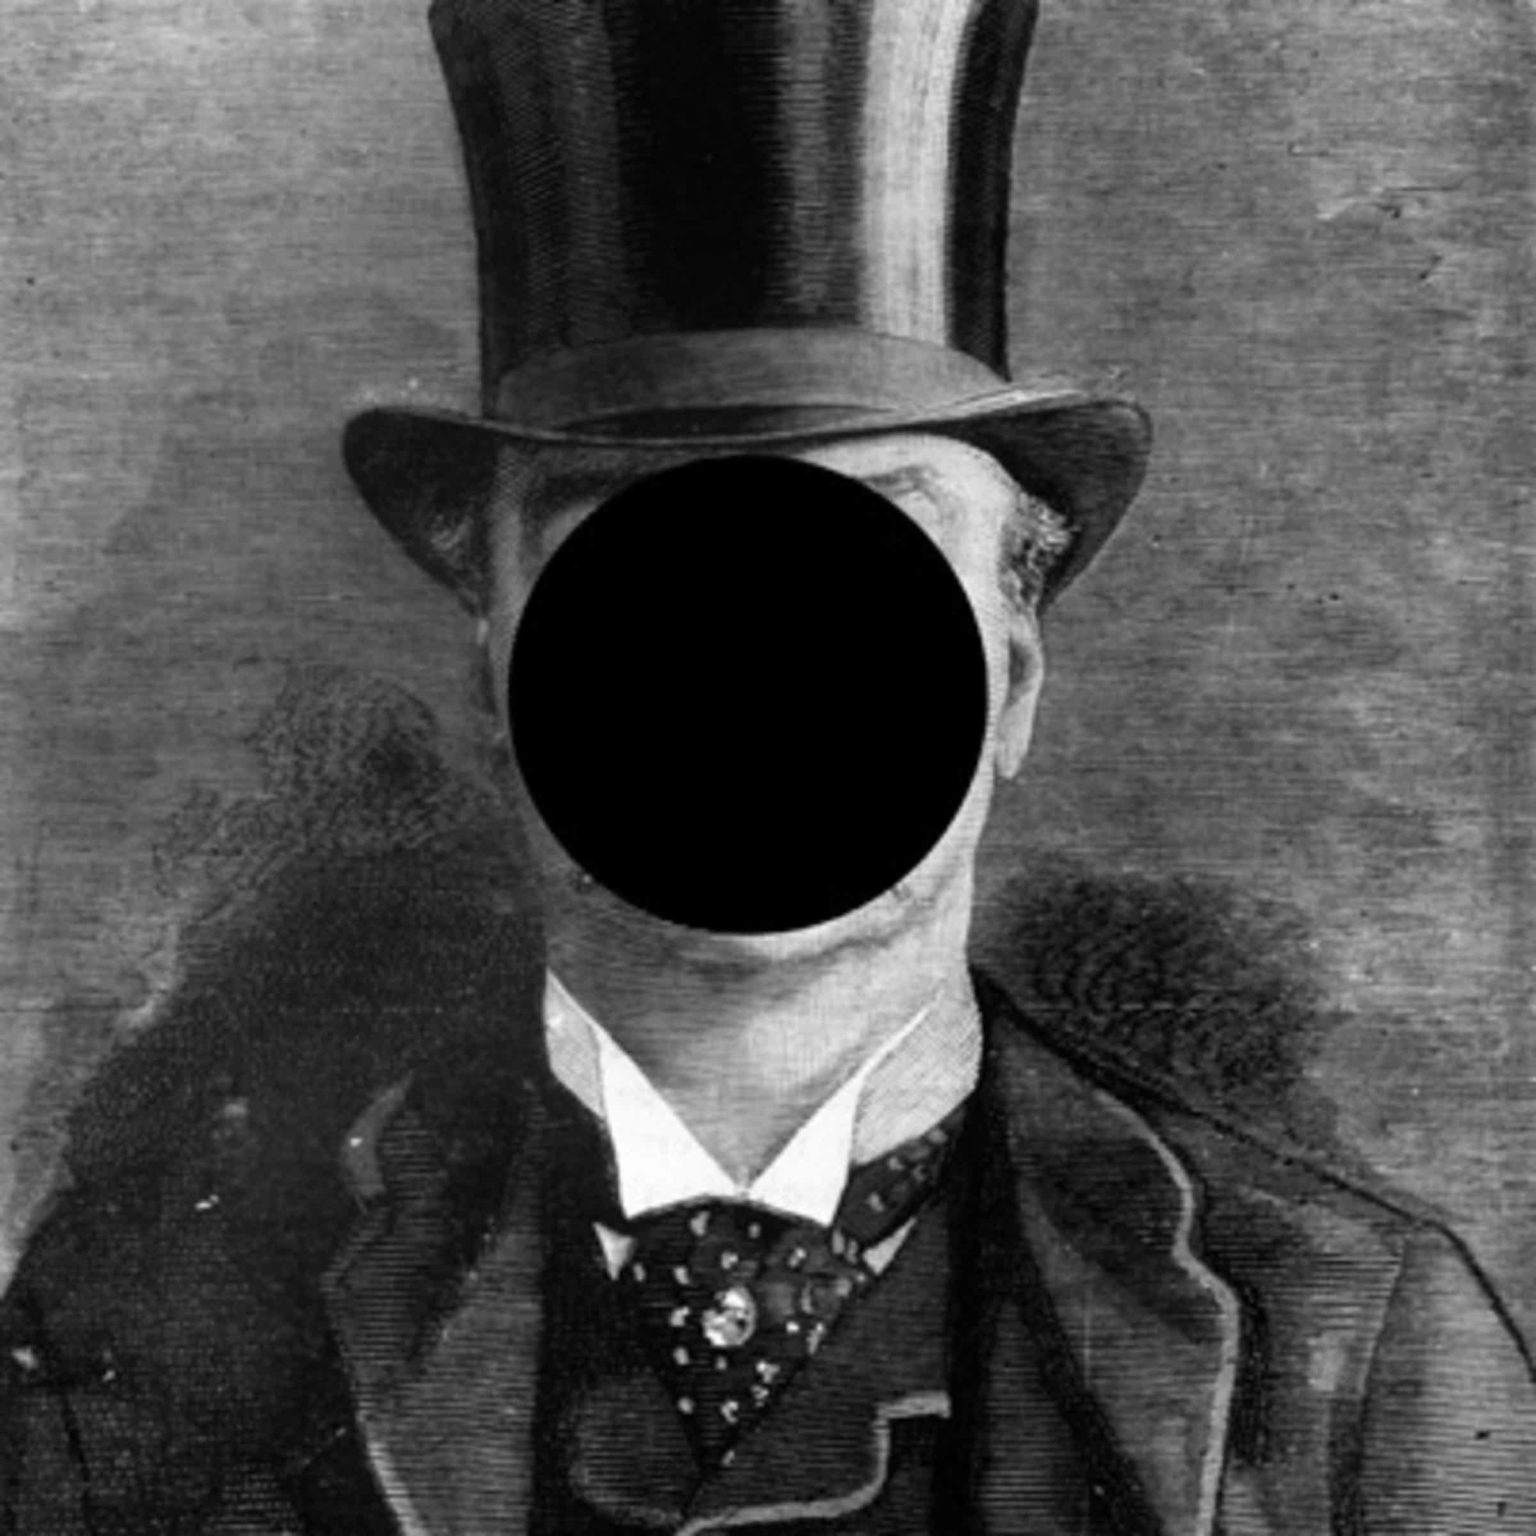 In the halls of the history of true crime, there is one unsolved case that everyone will know. Here's what we know (or don't know) about Jack the Ripper.